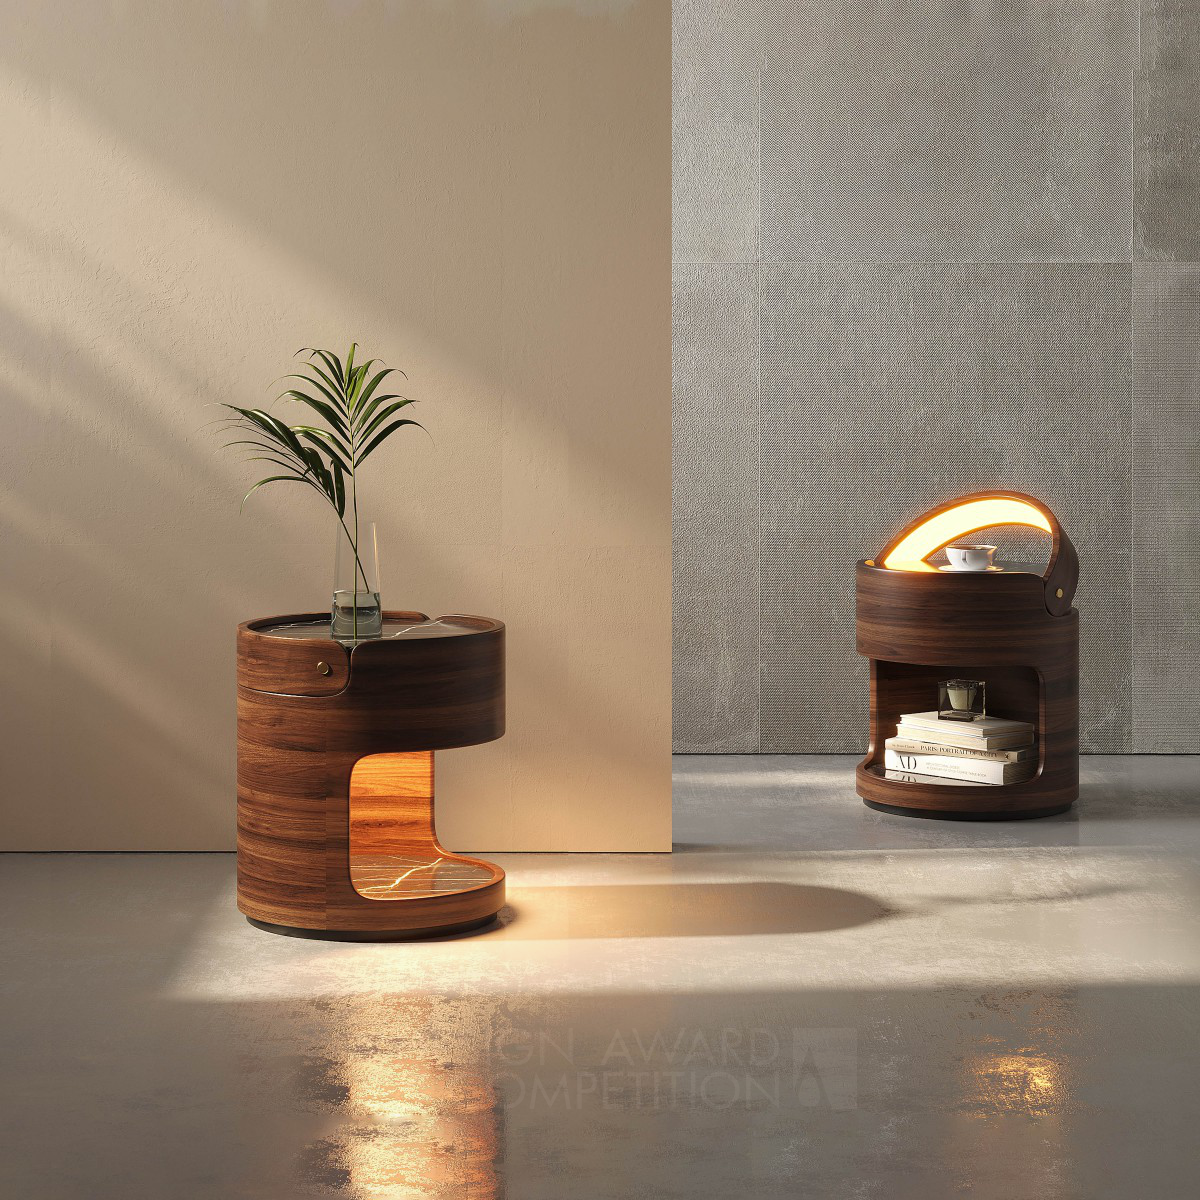 Ziel Home Furnishing Technology Co., Ltd wins Golden at the prestigious A' Furniture Design Award with Pac Man Side Table With Lights.